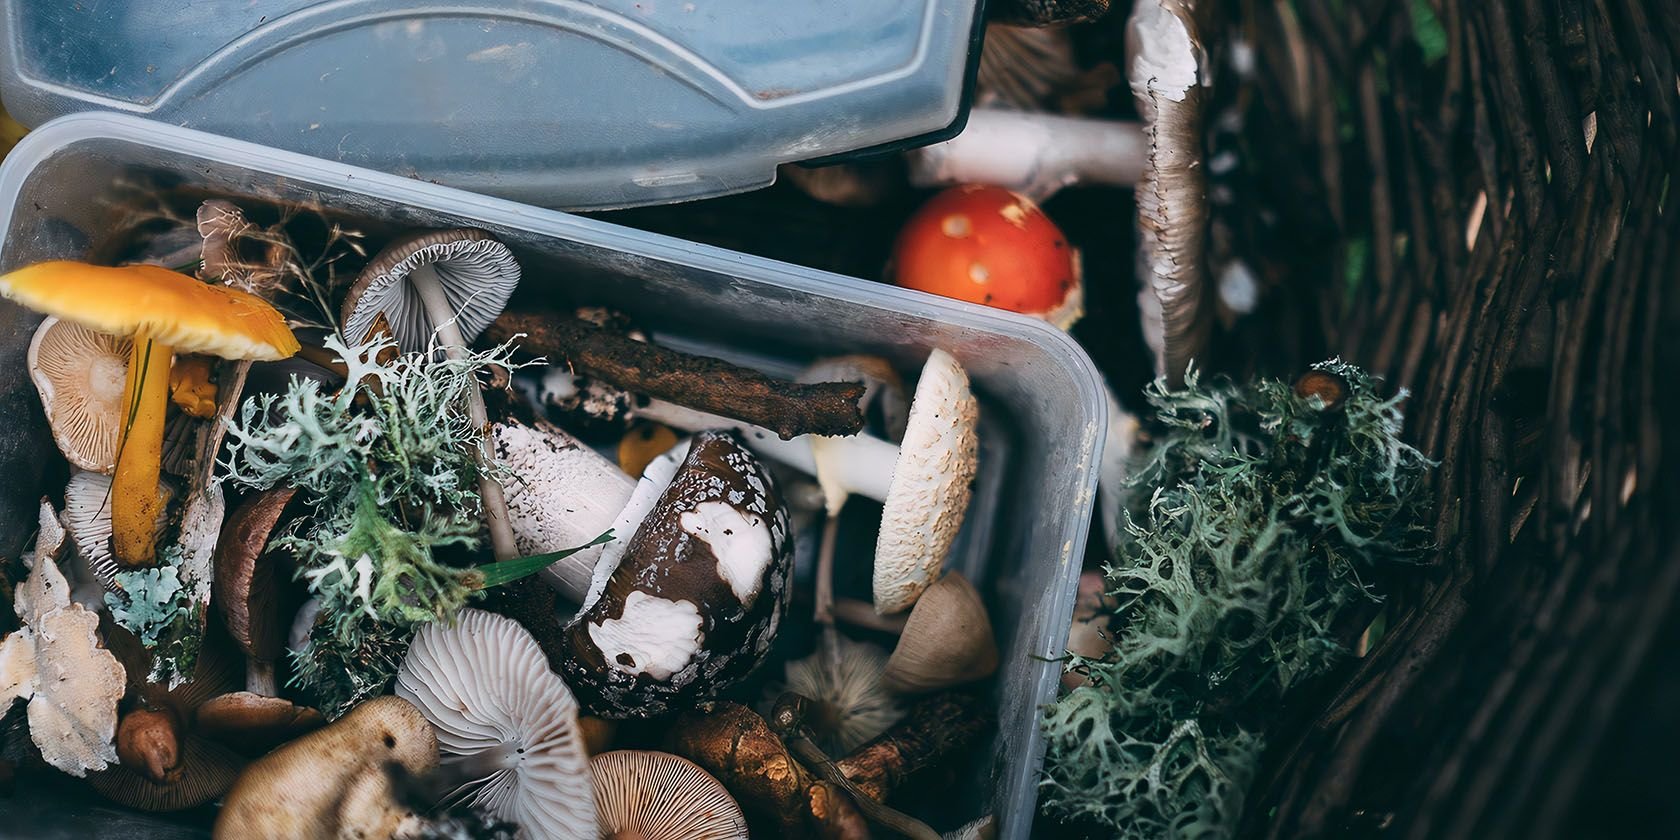 The Best Wild Foraging Resources to Help Expand Your Palate